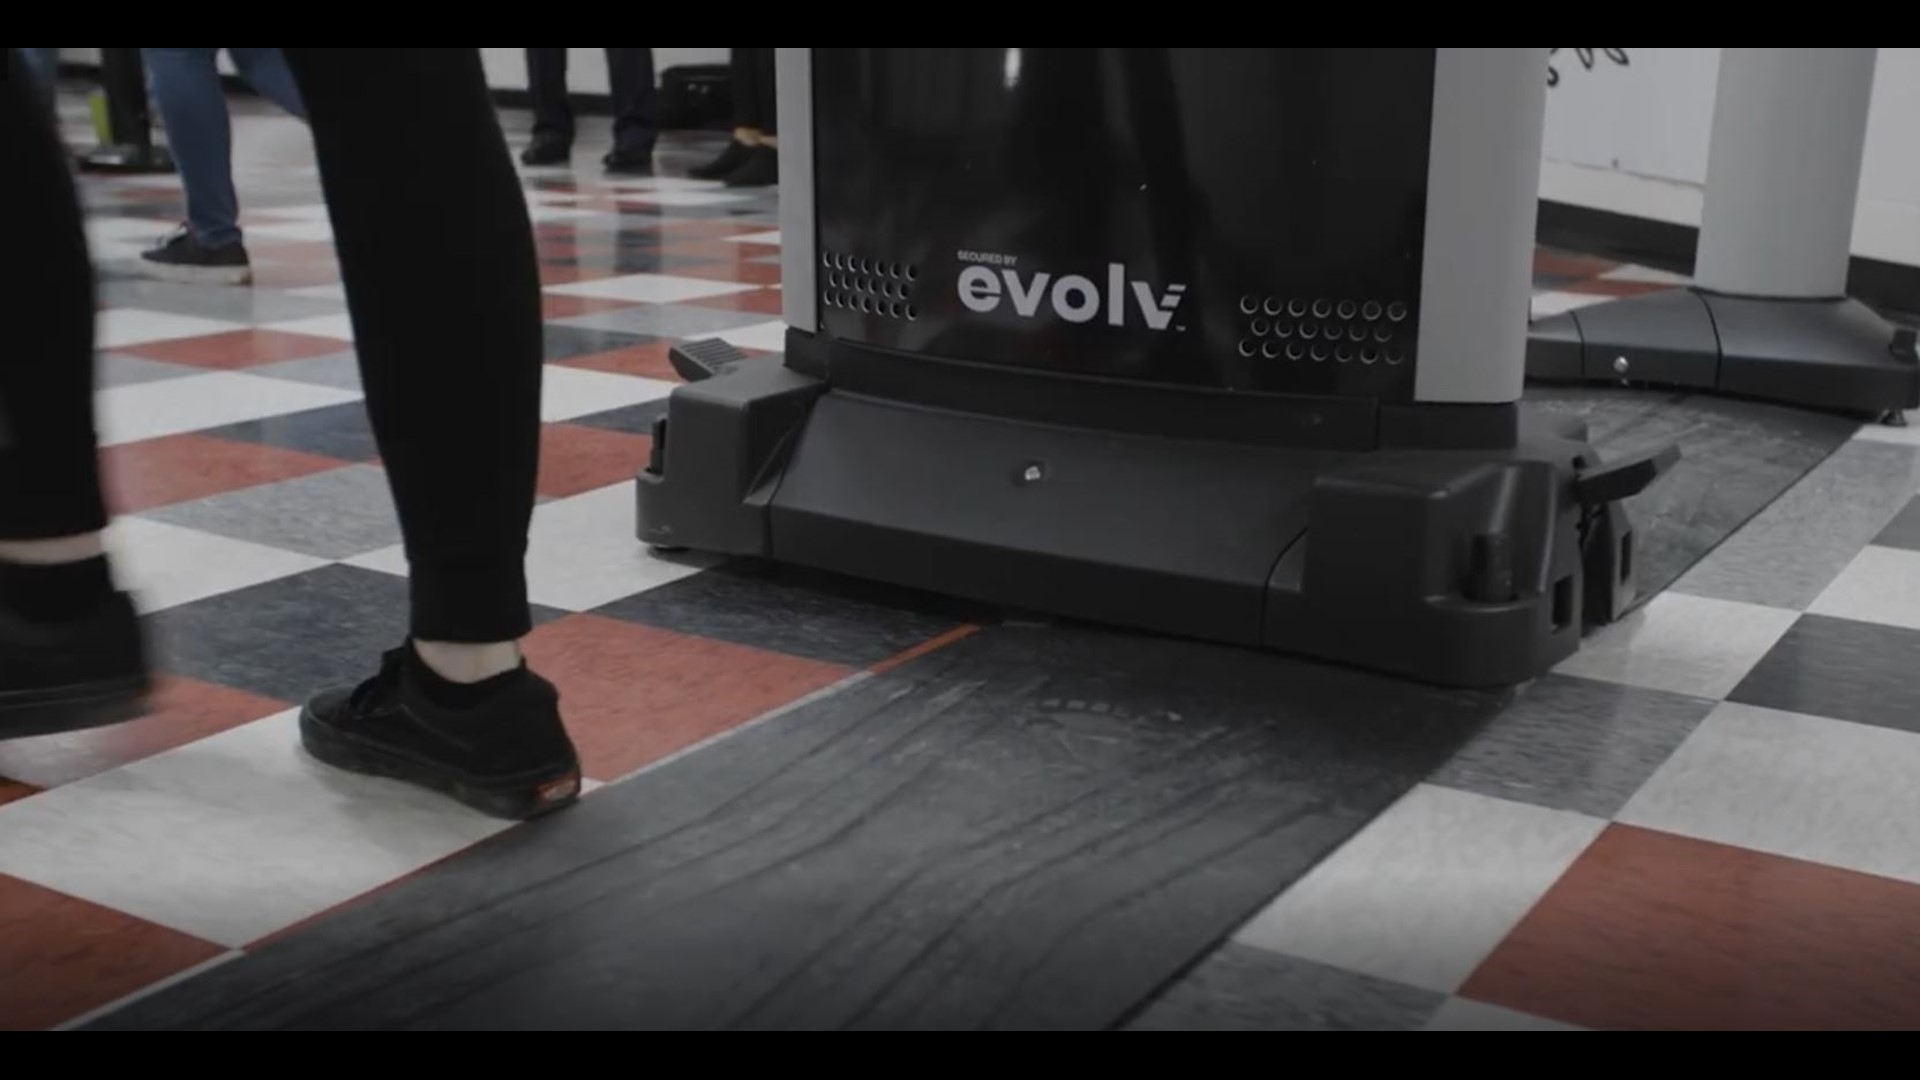 Huntsville City Schools is rolling out Evolv Technology, an advanced weapons detection screening system, as an added layer of campus security.